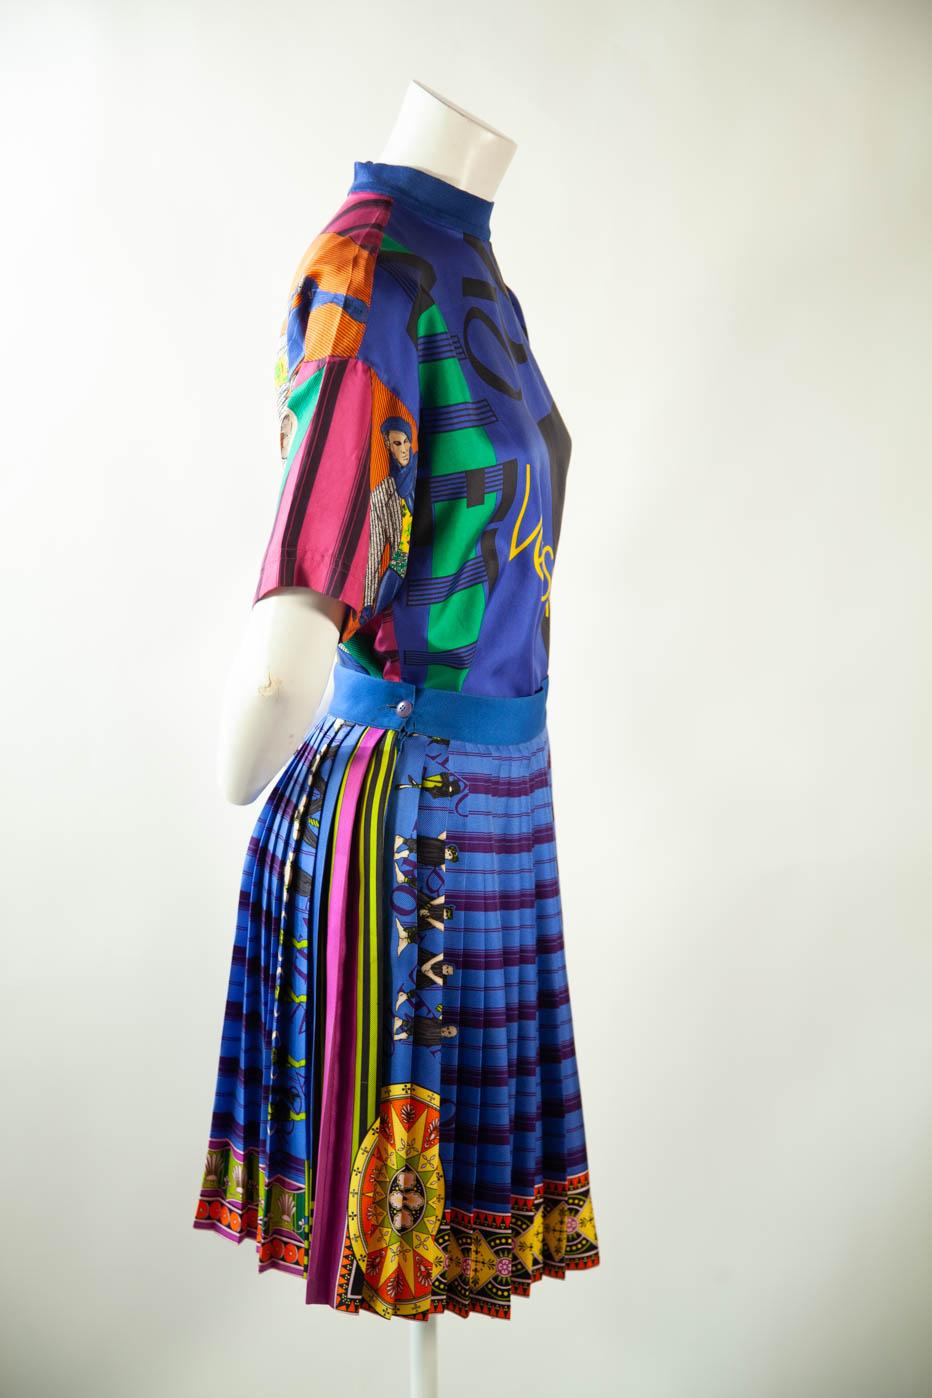 Gianni Versace pleated skirt and top in excellent condition. 100% silk.

EU 42